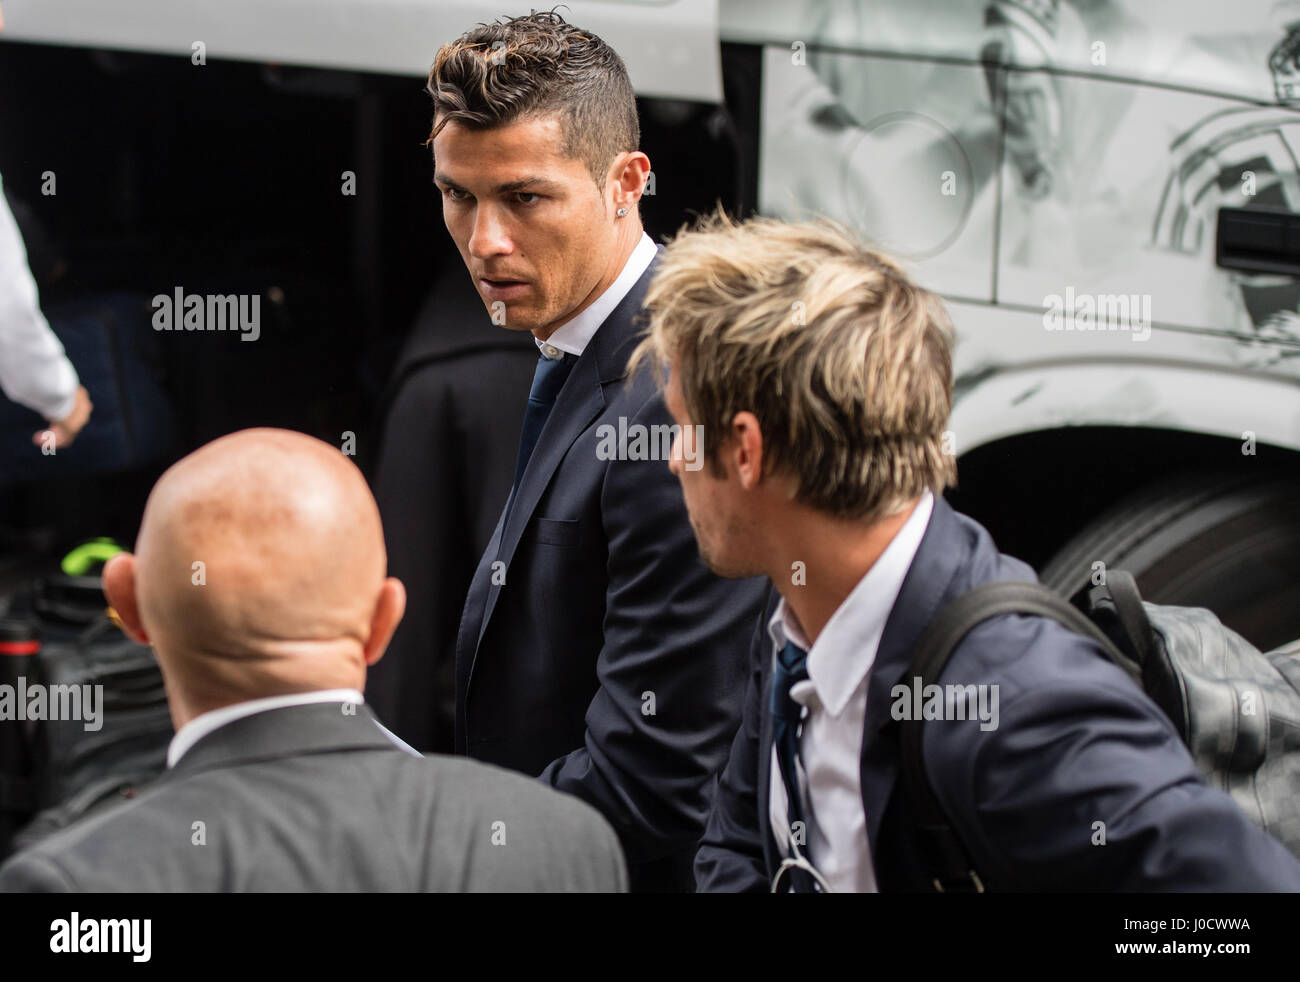 Munich, Germany. 11th Apr, 2017. Real Madrid's Cristiano Ronaldo (C) and Fabio Coentrao (R) arrive at the team hotel in Munich, Germany, 11 April 2017. The Champions League quarterfinals first leg match between FC Bayern Munich and Real Madrid begins 12 April 2017. Credit: dpa picture alliance/Alamy Live News Stock Photo